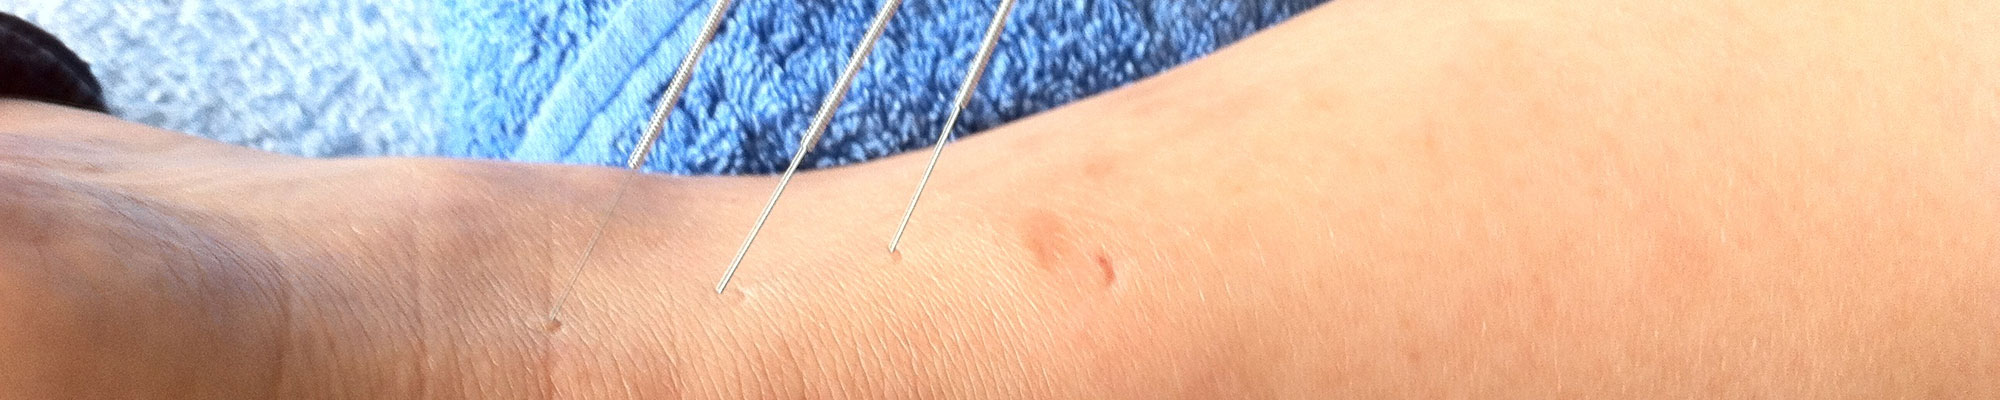 Woman having acupuncture in her wrist